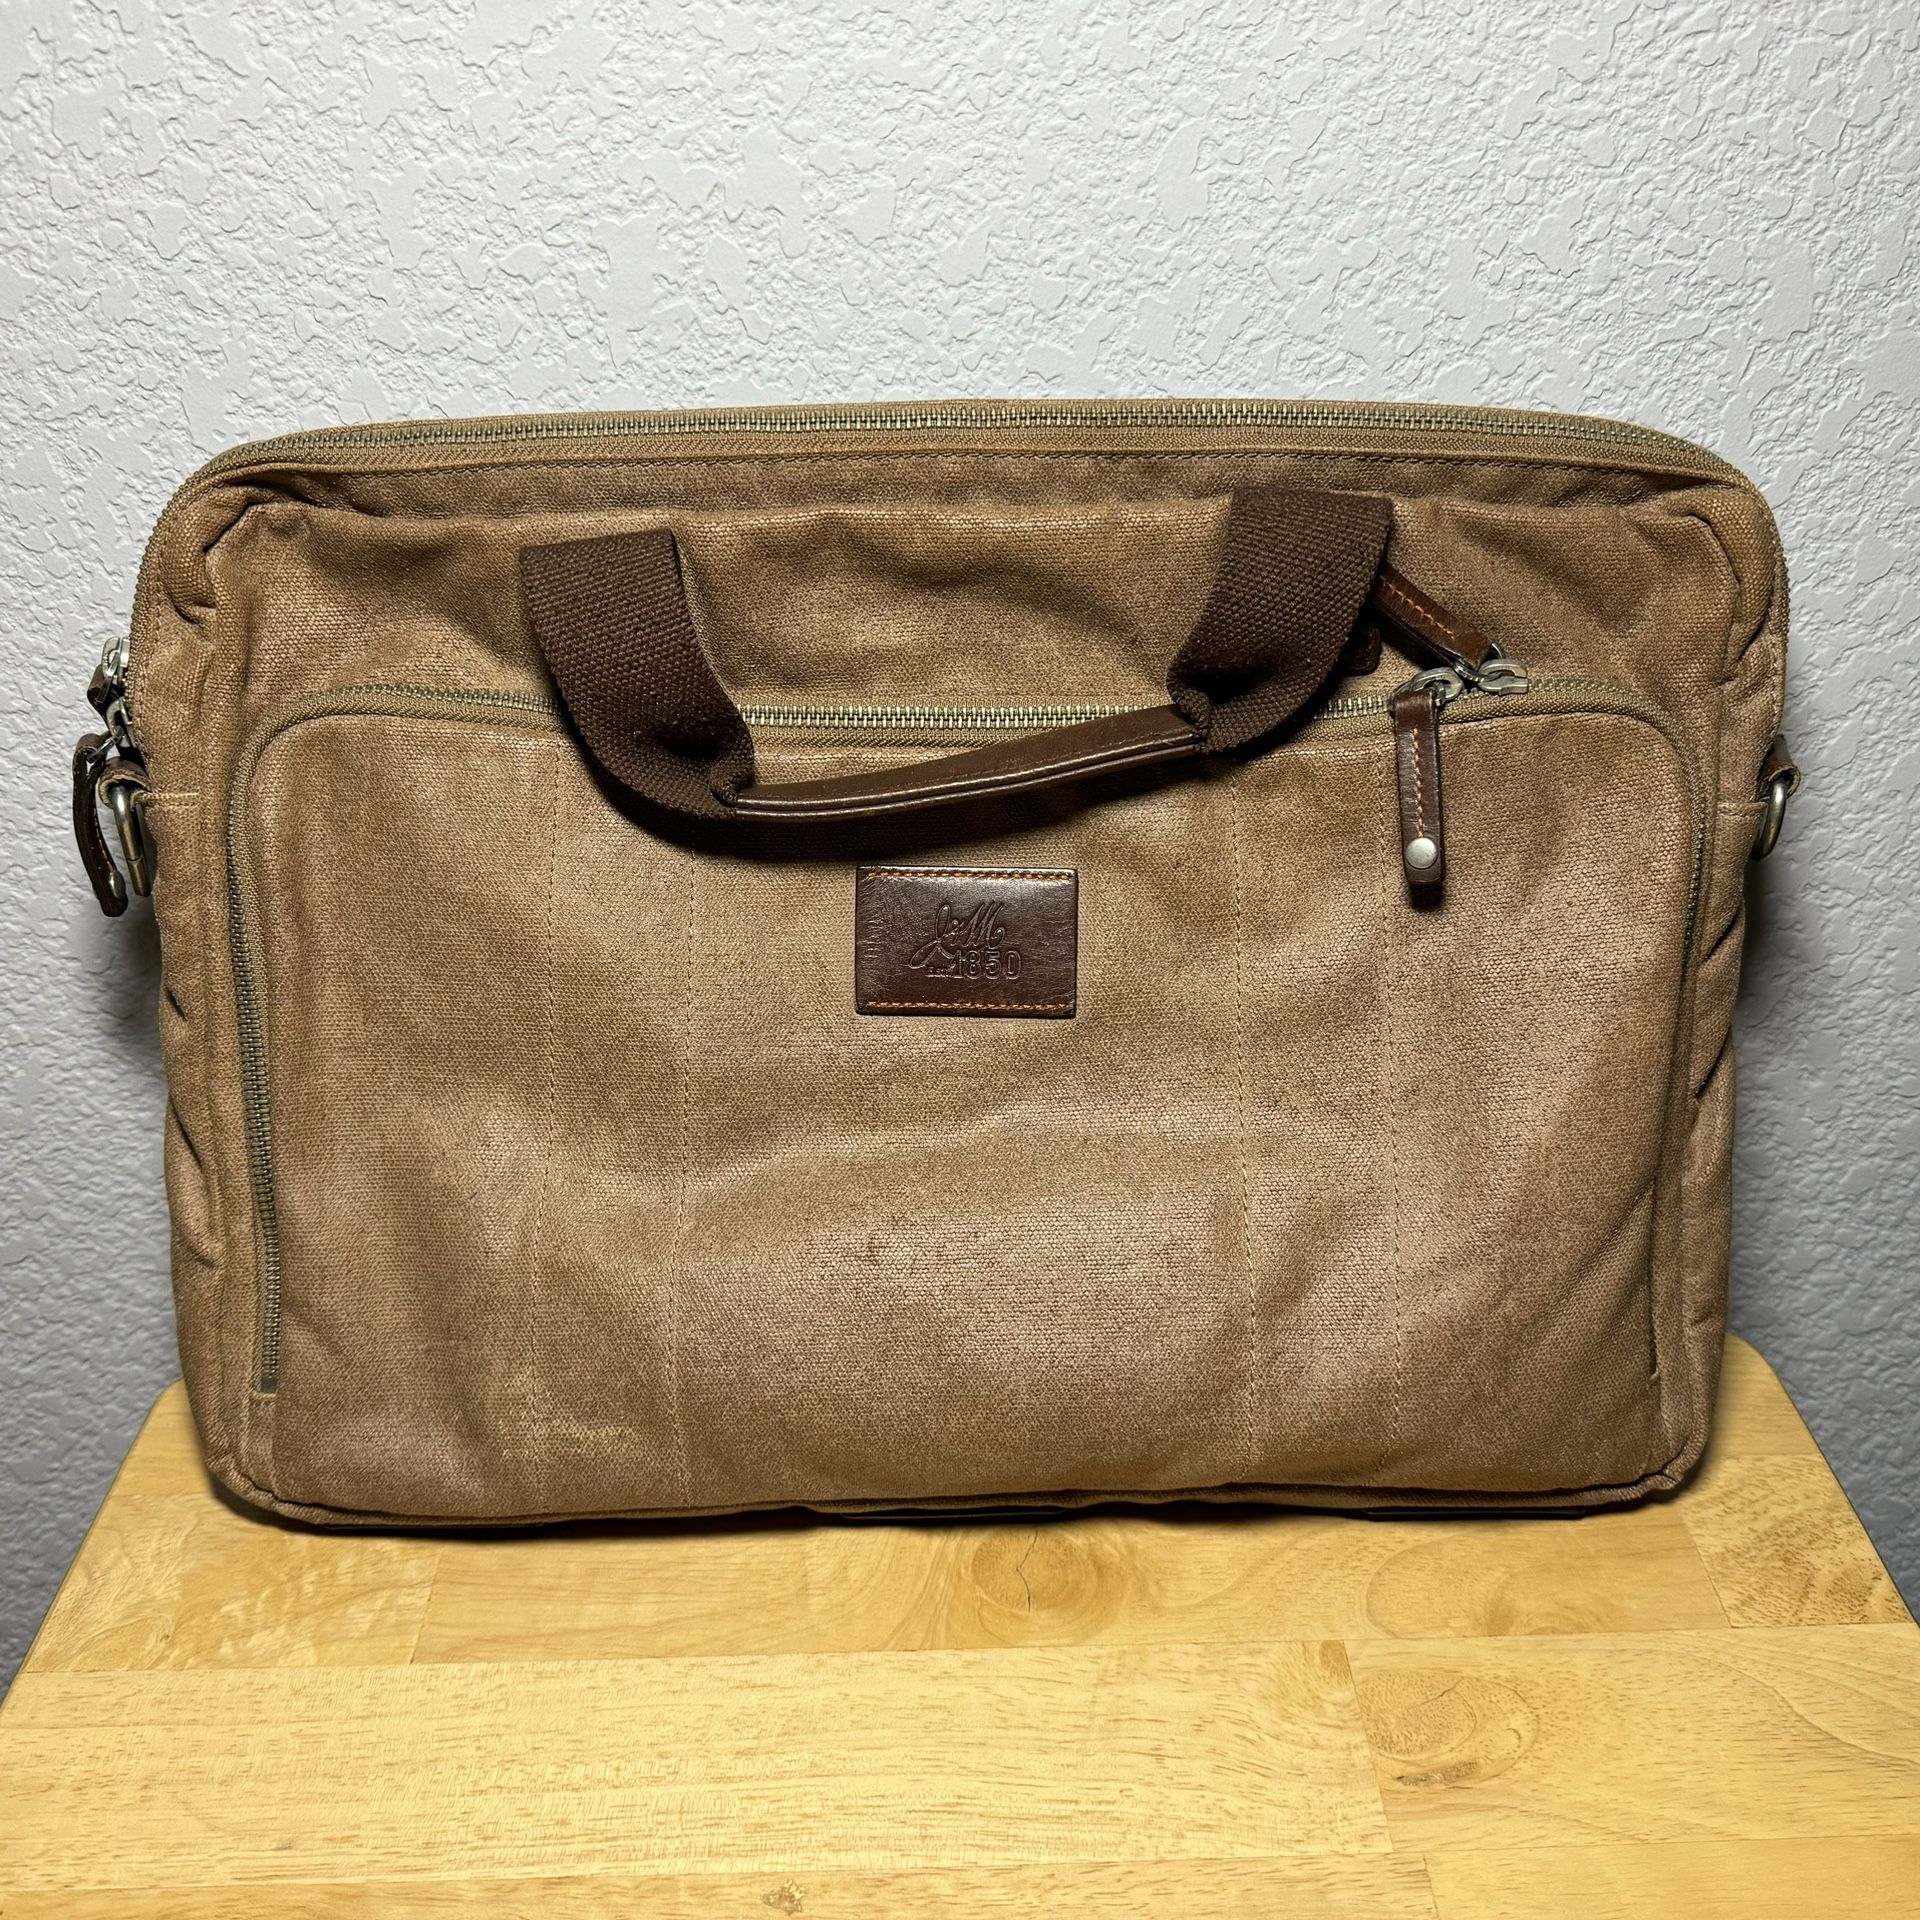 Johnston and Murphy Messenger Briefcase Bag - Brown Coated Canvas ~ Removable Shoulder Strap ~ Vintage Look in Excellent Condition 